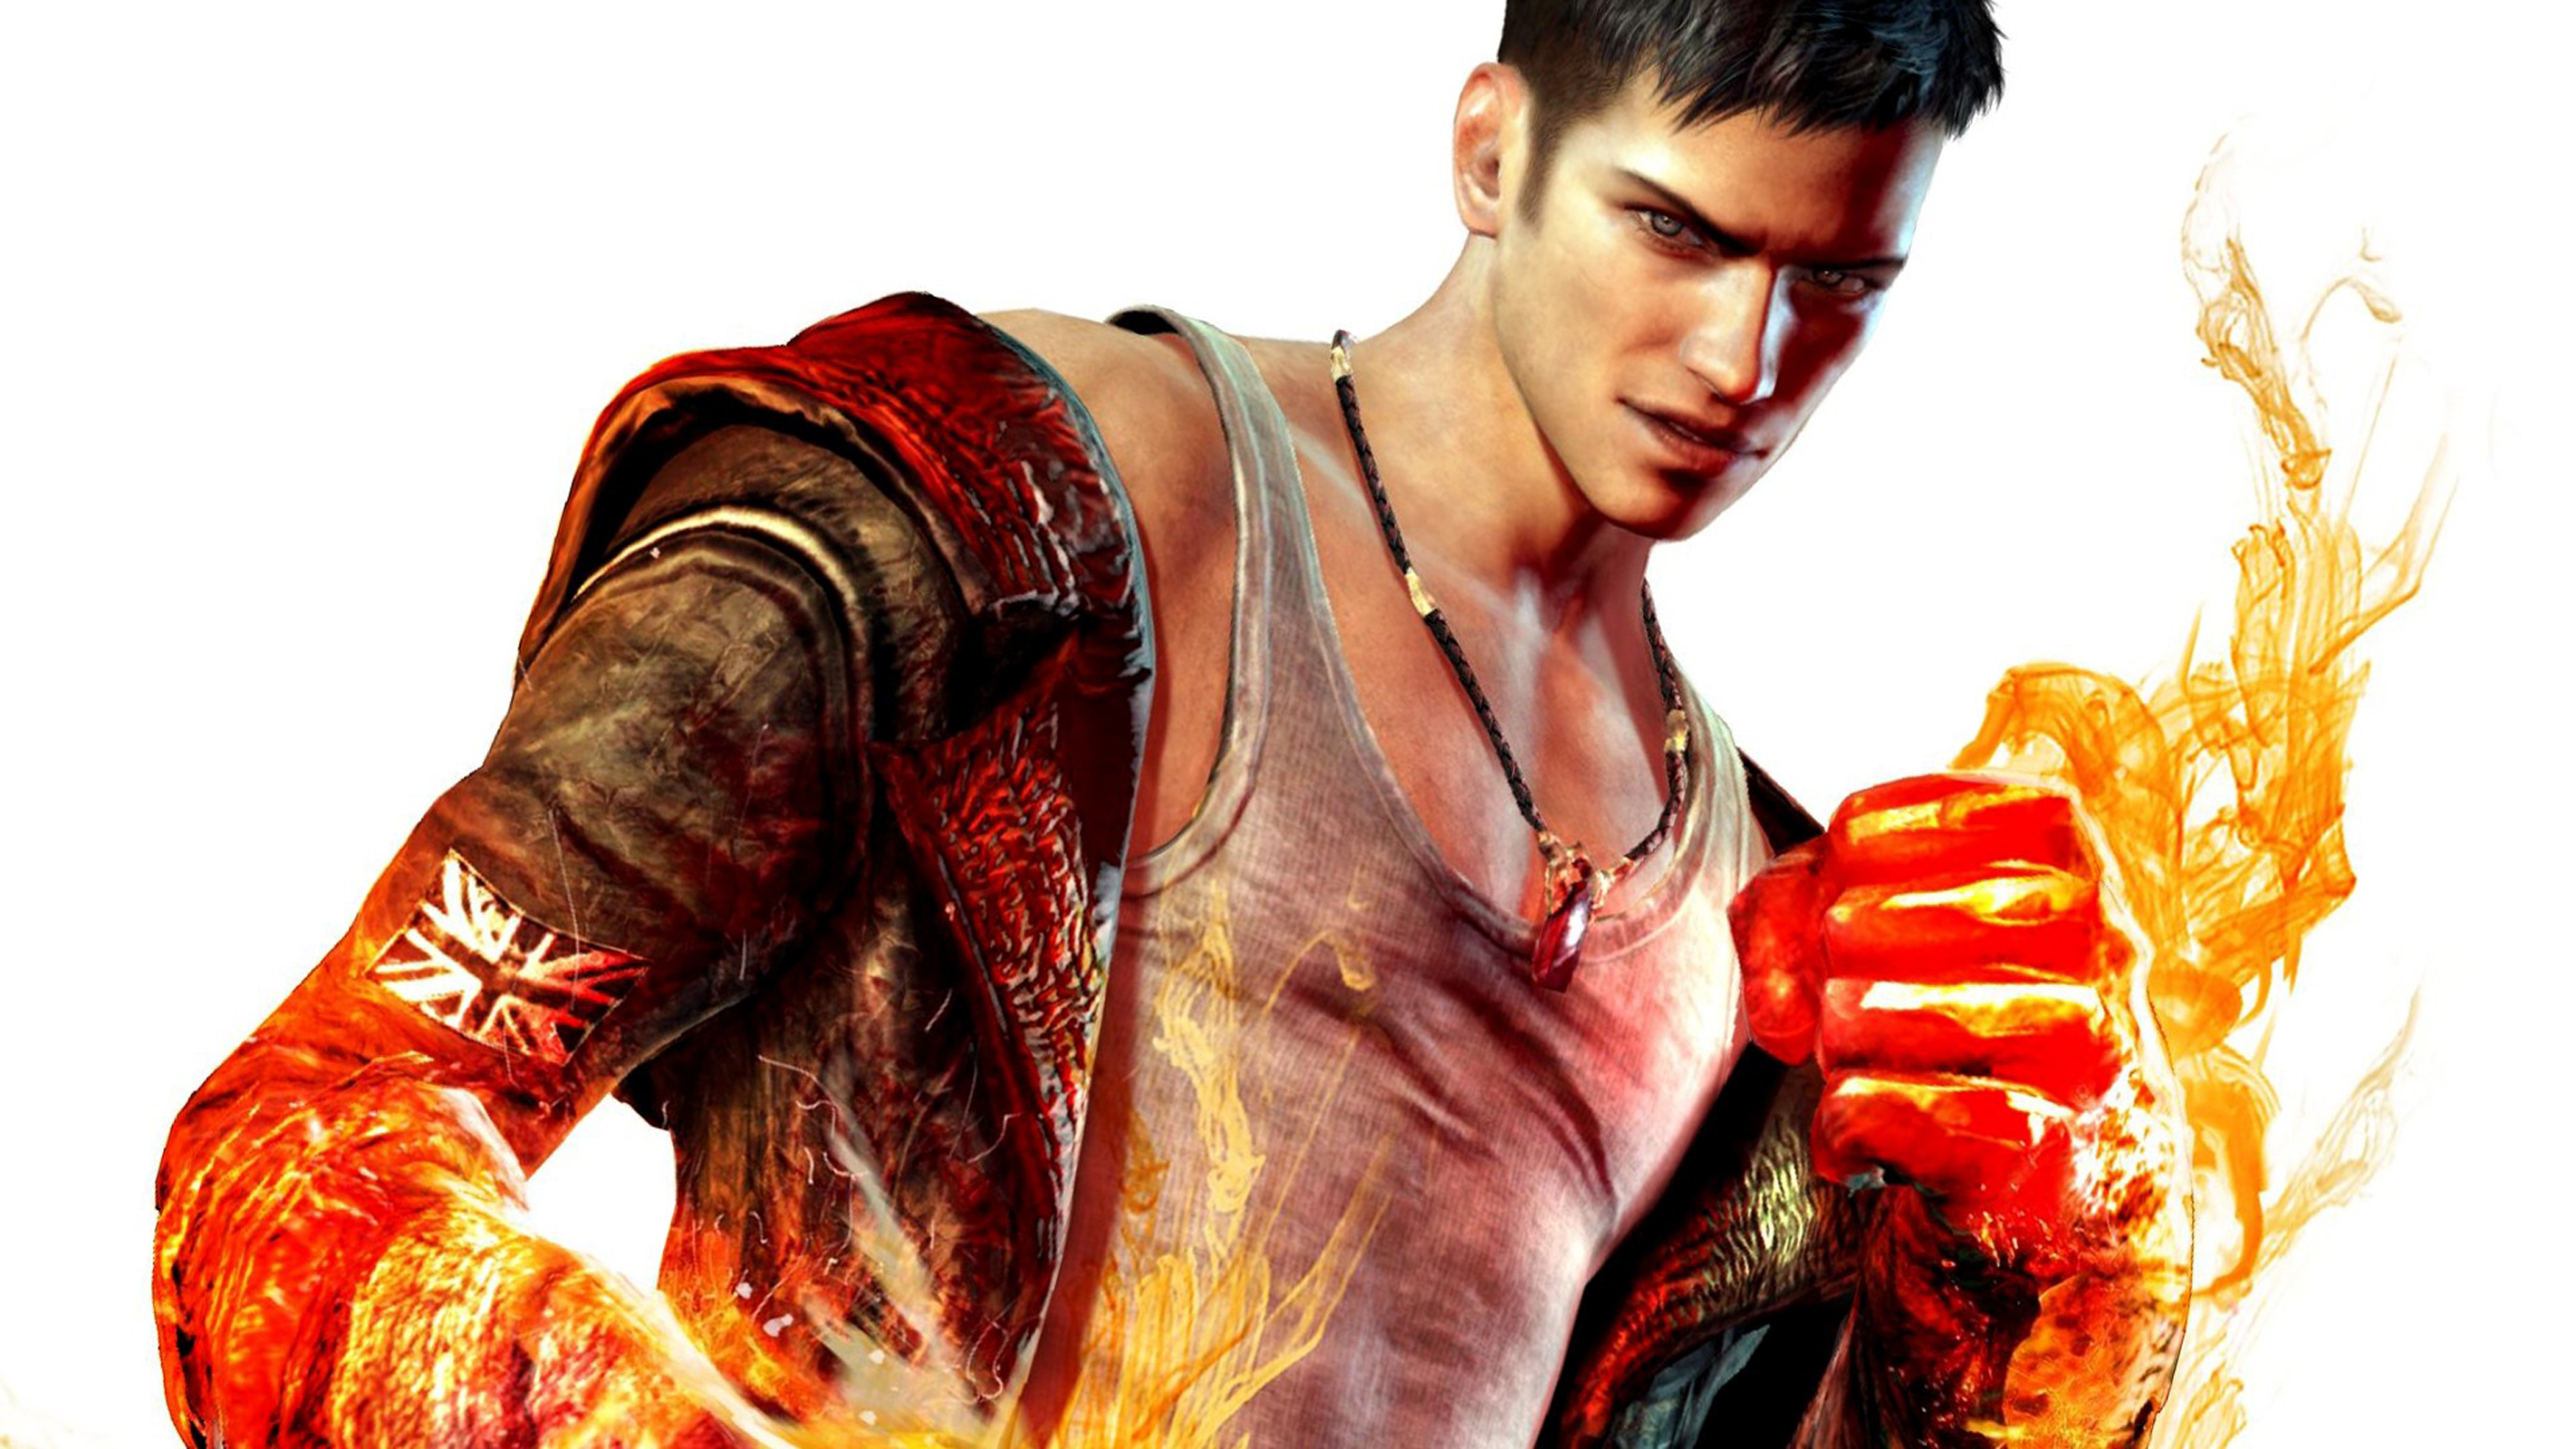 Games devil may cry. Данте Devil May Cry 2013. Данте Devil May Cry 5. DMC Devil May Cry Dante 2013. Данте ДМС 3.